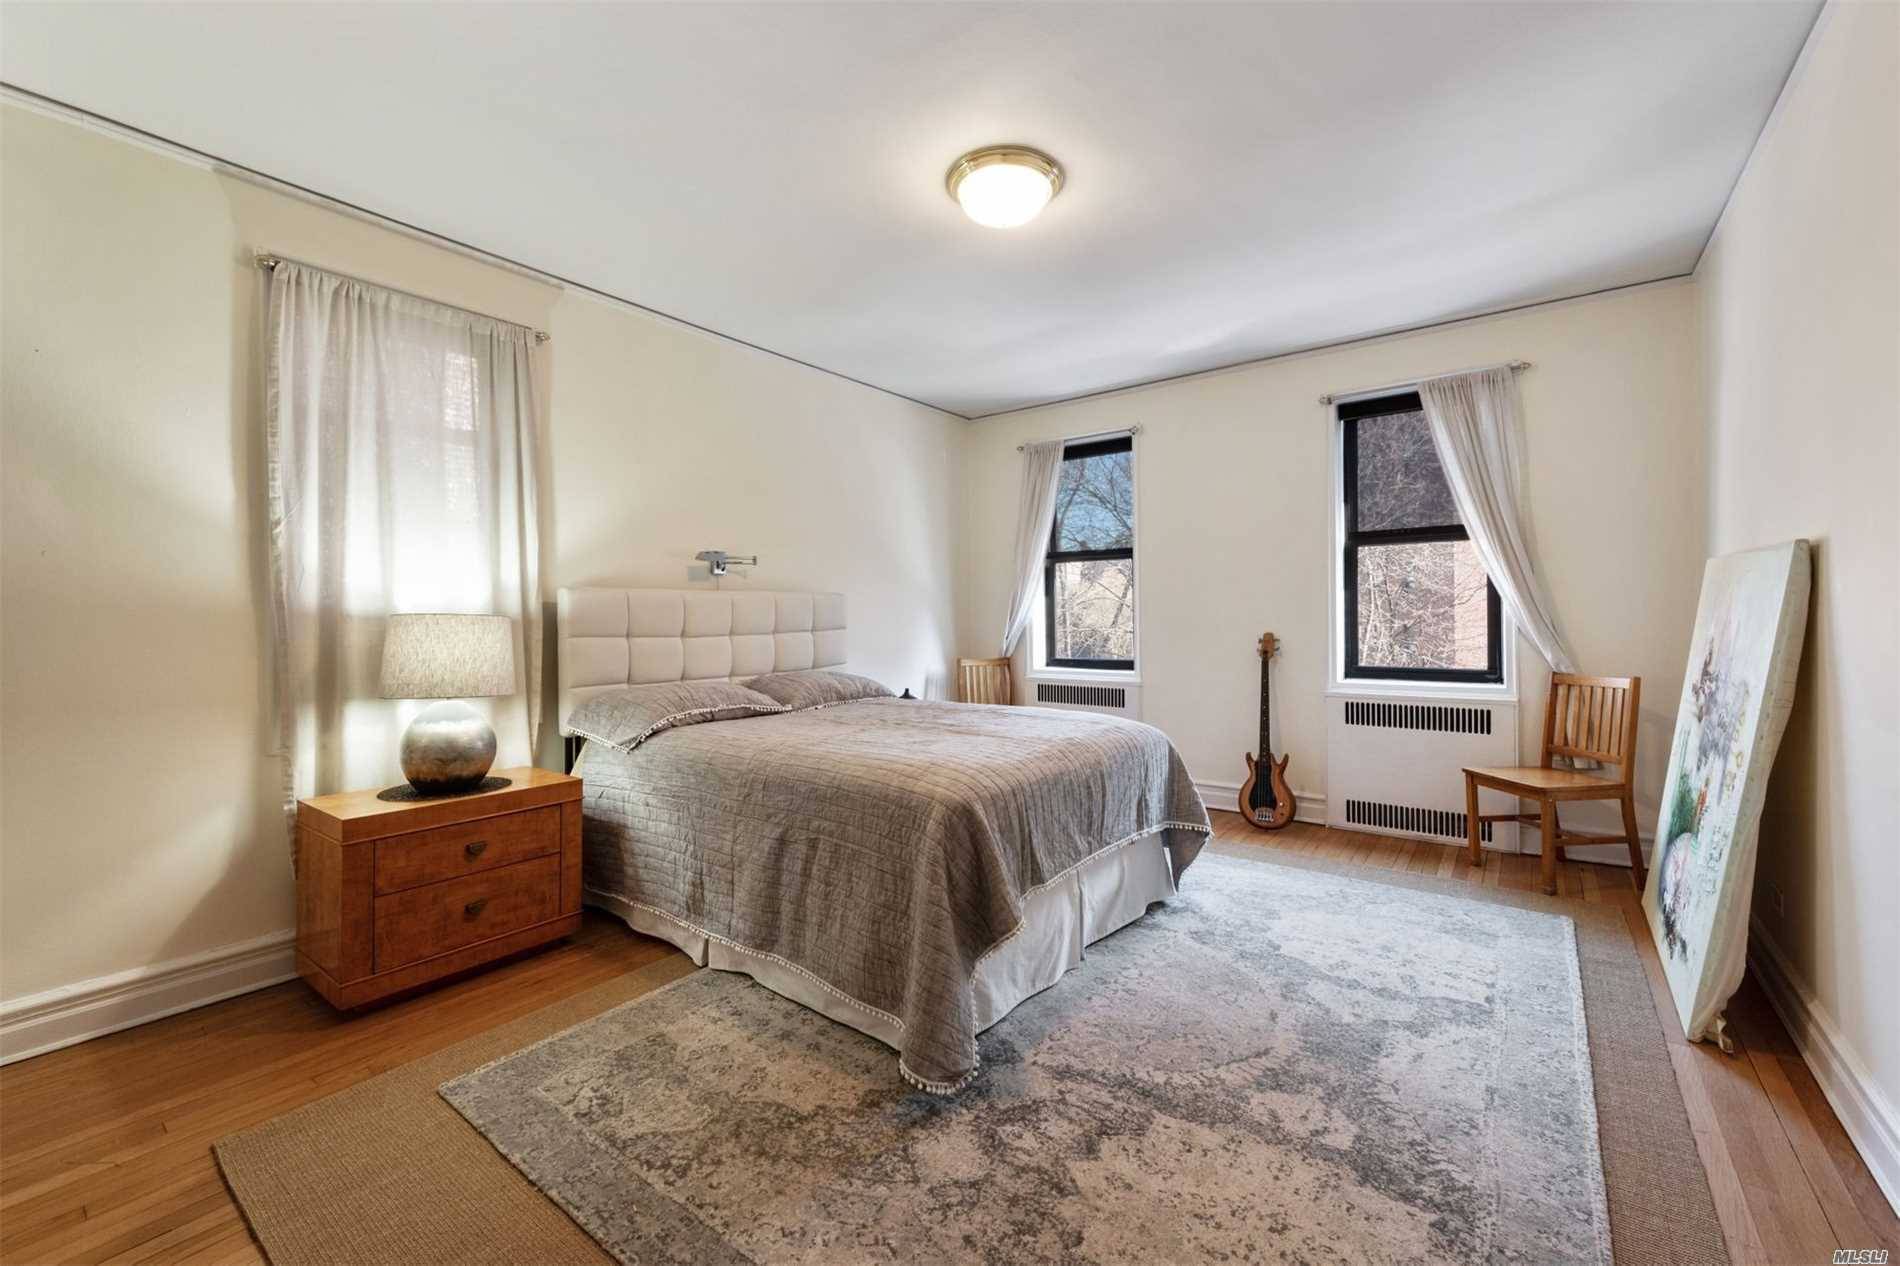 This corner one bedroom apartment which faces predominantly east but has northern exposure as well, has oversized rooms often found in buildings of this era.